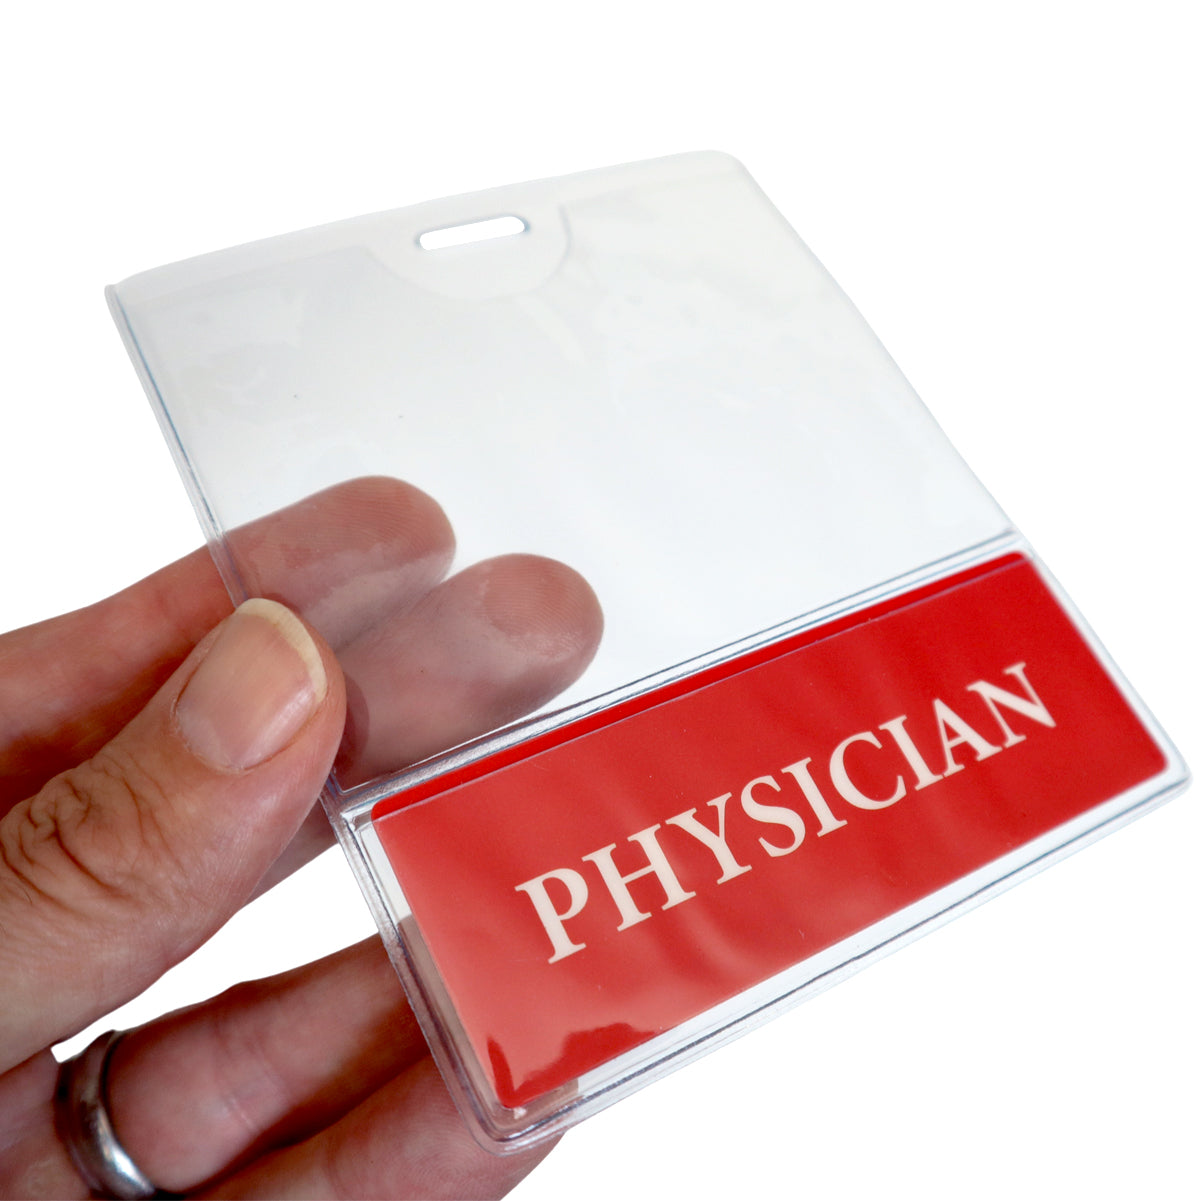 PHYSICIAN BadgeBottoms 2 in 1 Badge Buddy and ID Badge Holder horizontal - Vinyl Sleeve for ID Card and Badge Bottom for Role Tag - Double Sided Print (red)